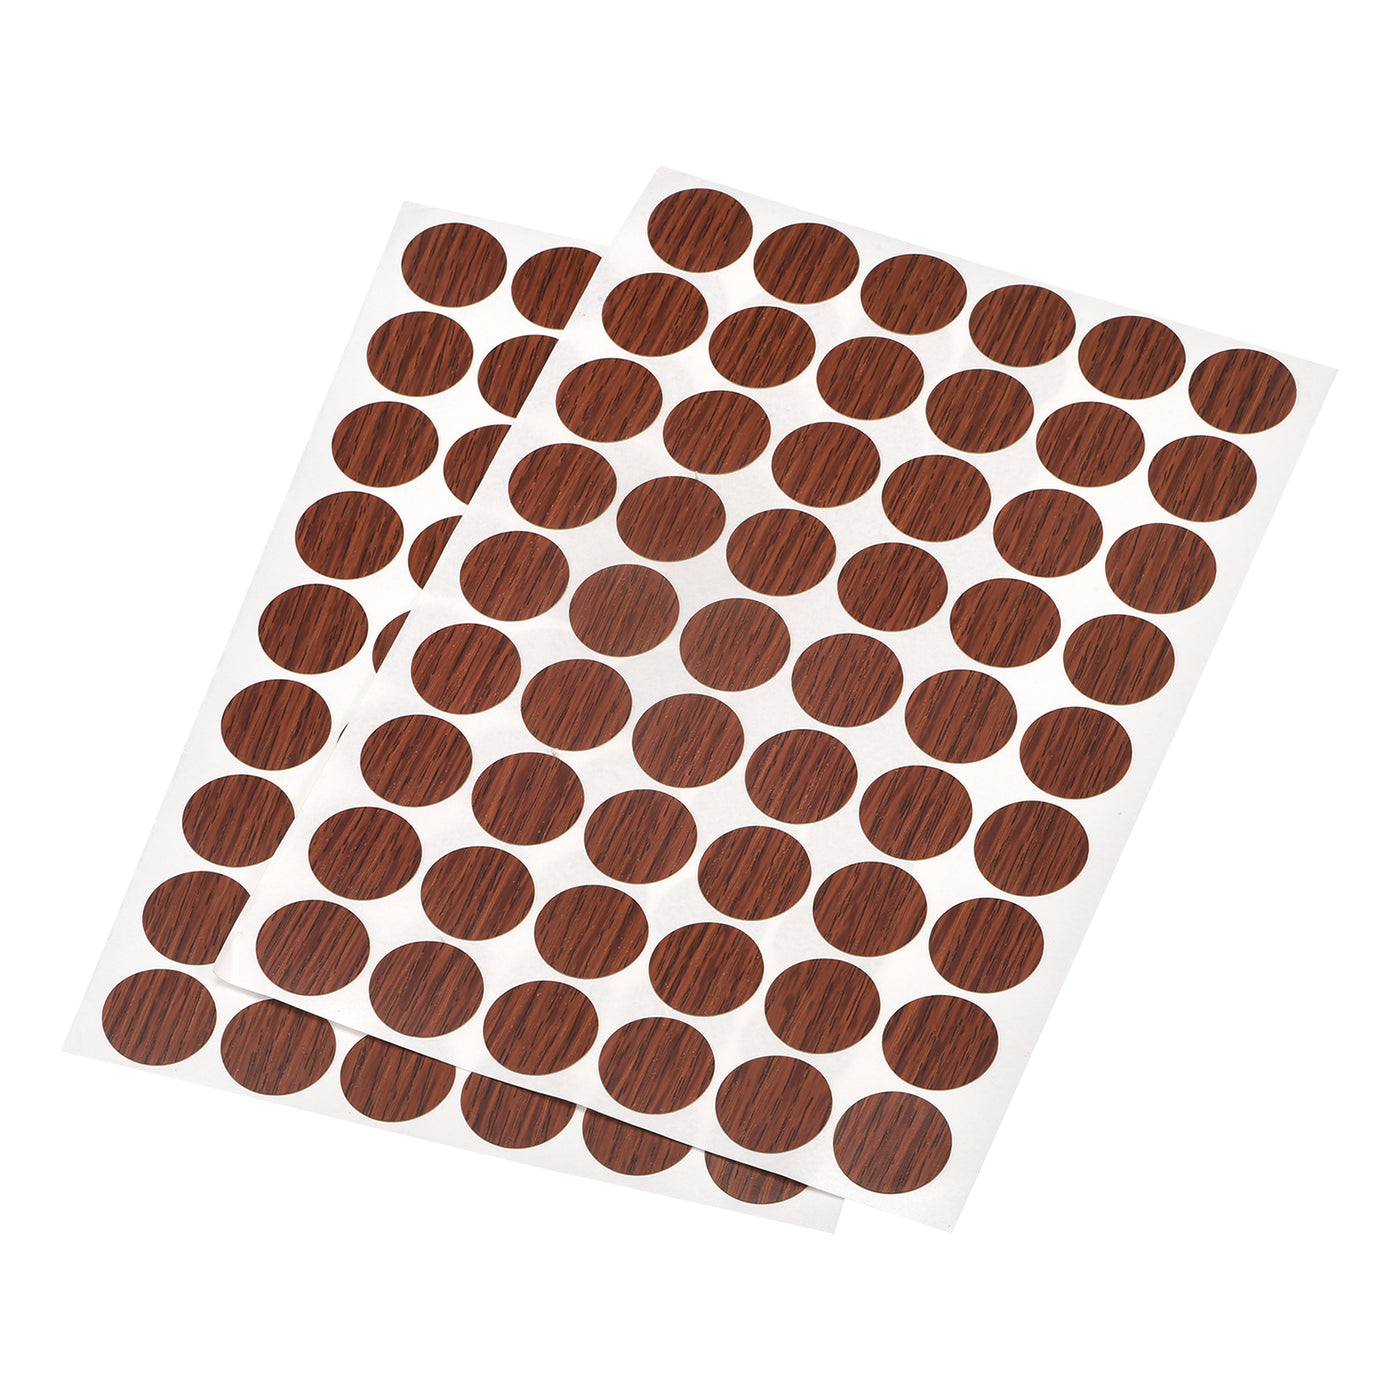 uxcell Uxcell Screw Hole Cover Stickers, 21mm Dia PVC Self Adhesive Covers Caps for Wood Furniture Cabinet Shelf Wardrobe, Walnut 2 Sheet/108pcs